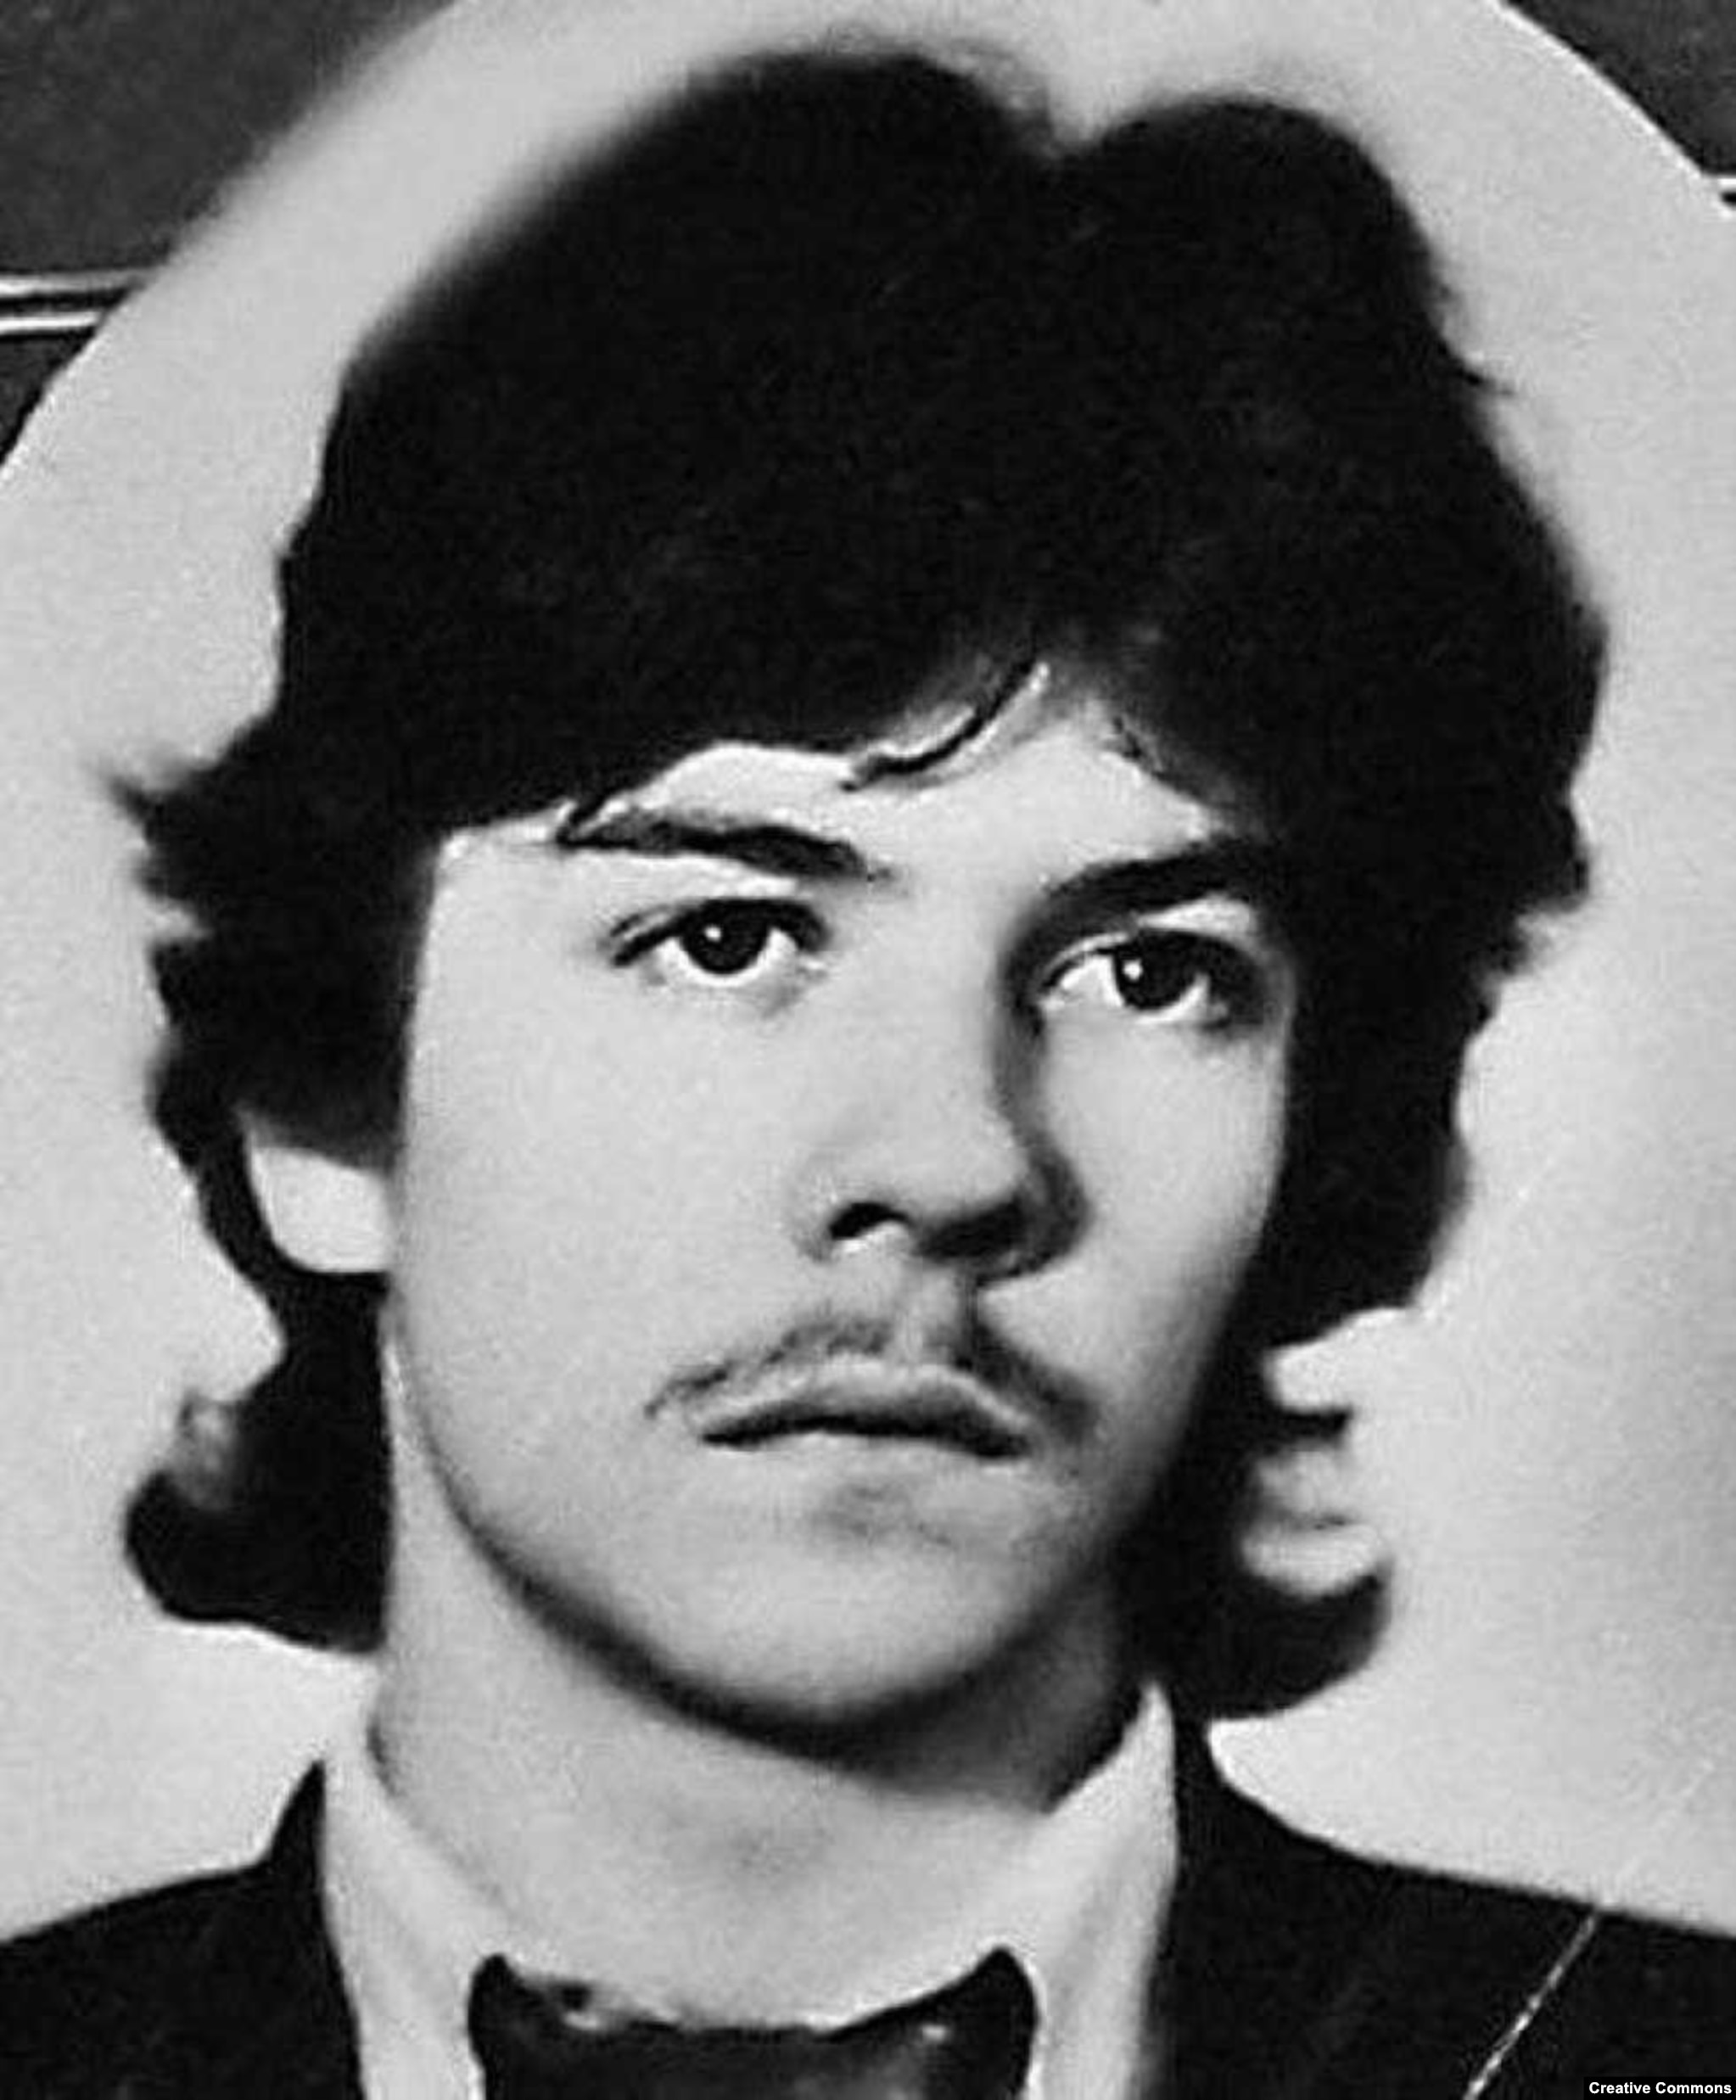 An undated photo shows the young Dmitry Medvedev. He was born in 1965 in St. Petersburg, then known as Leningrad, where he studied and taught law.